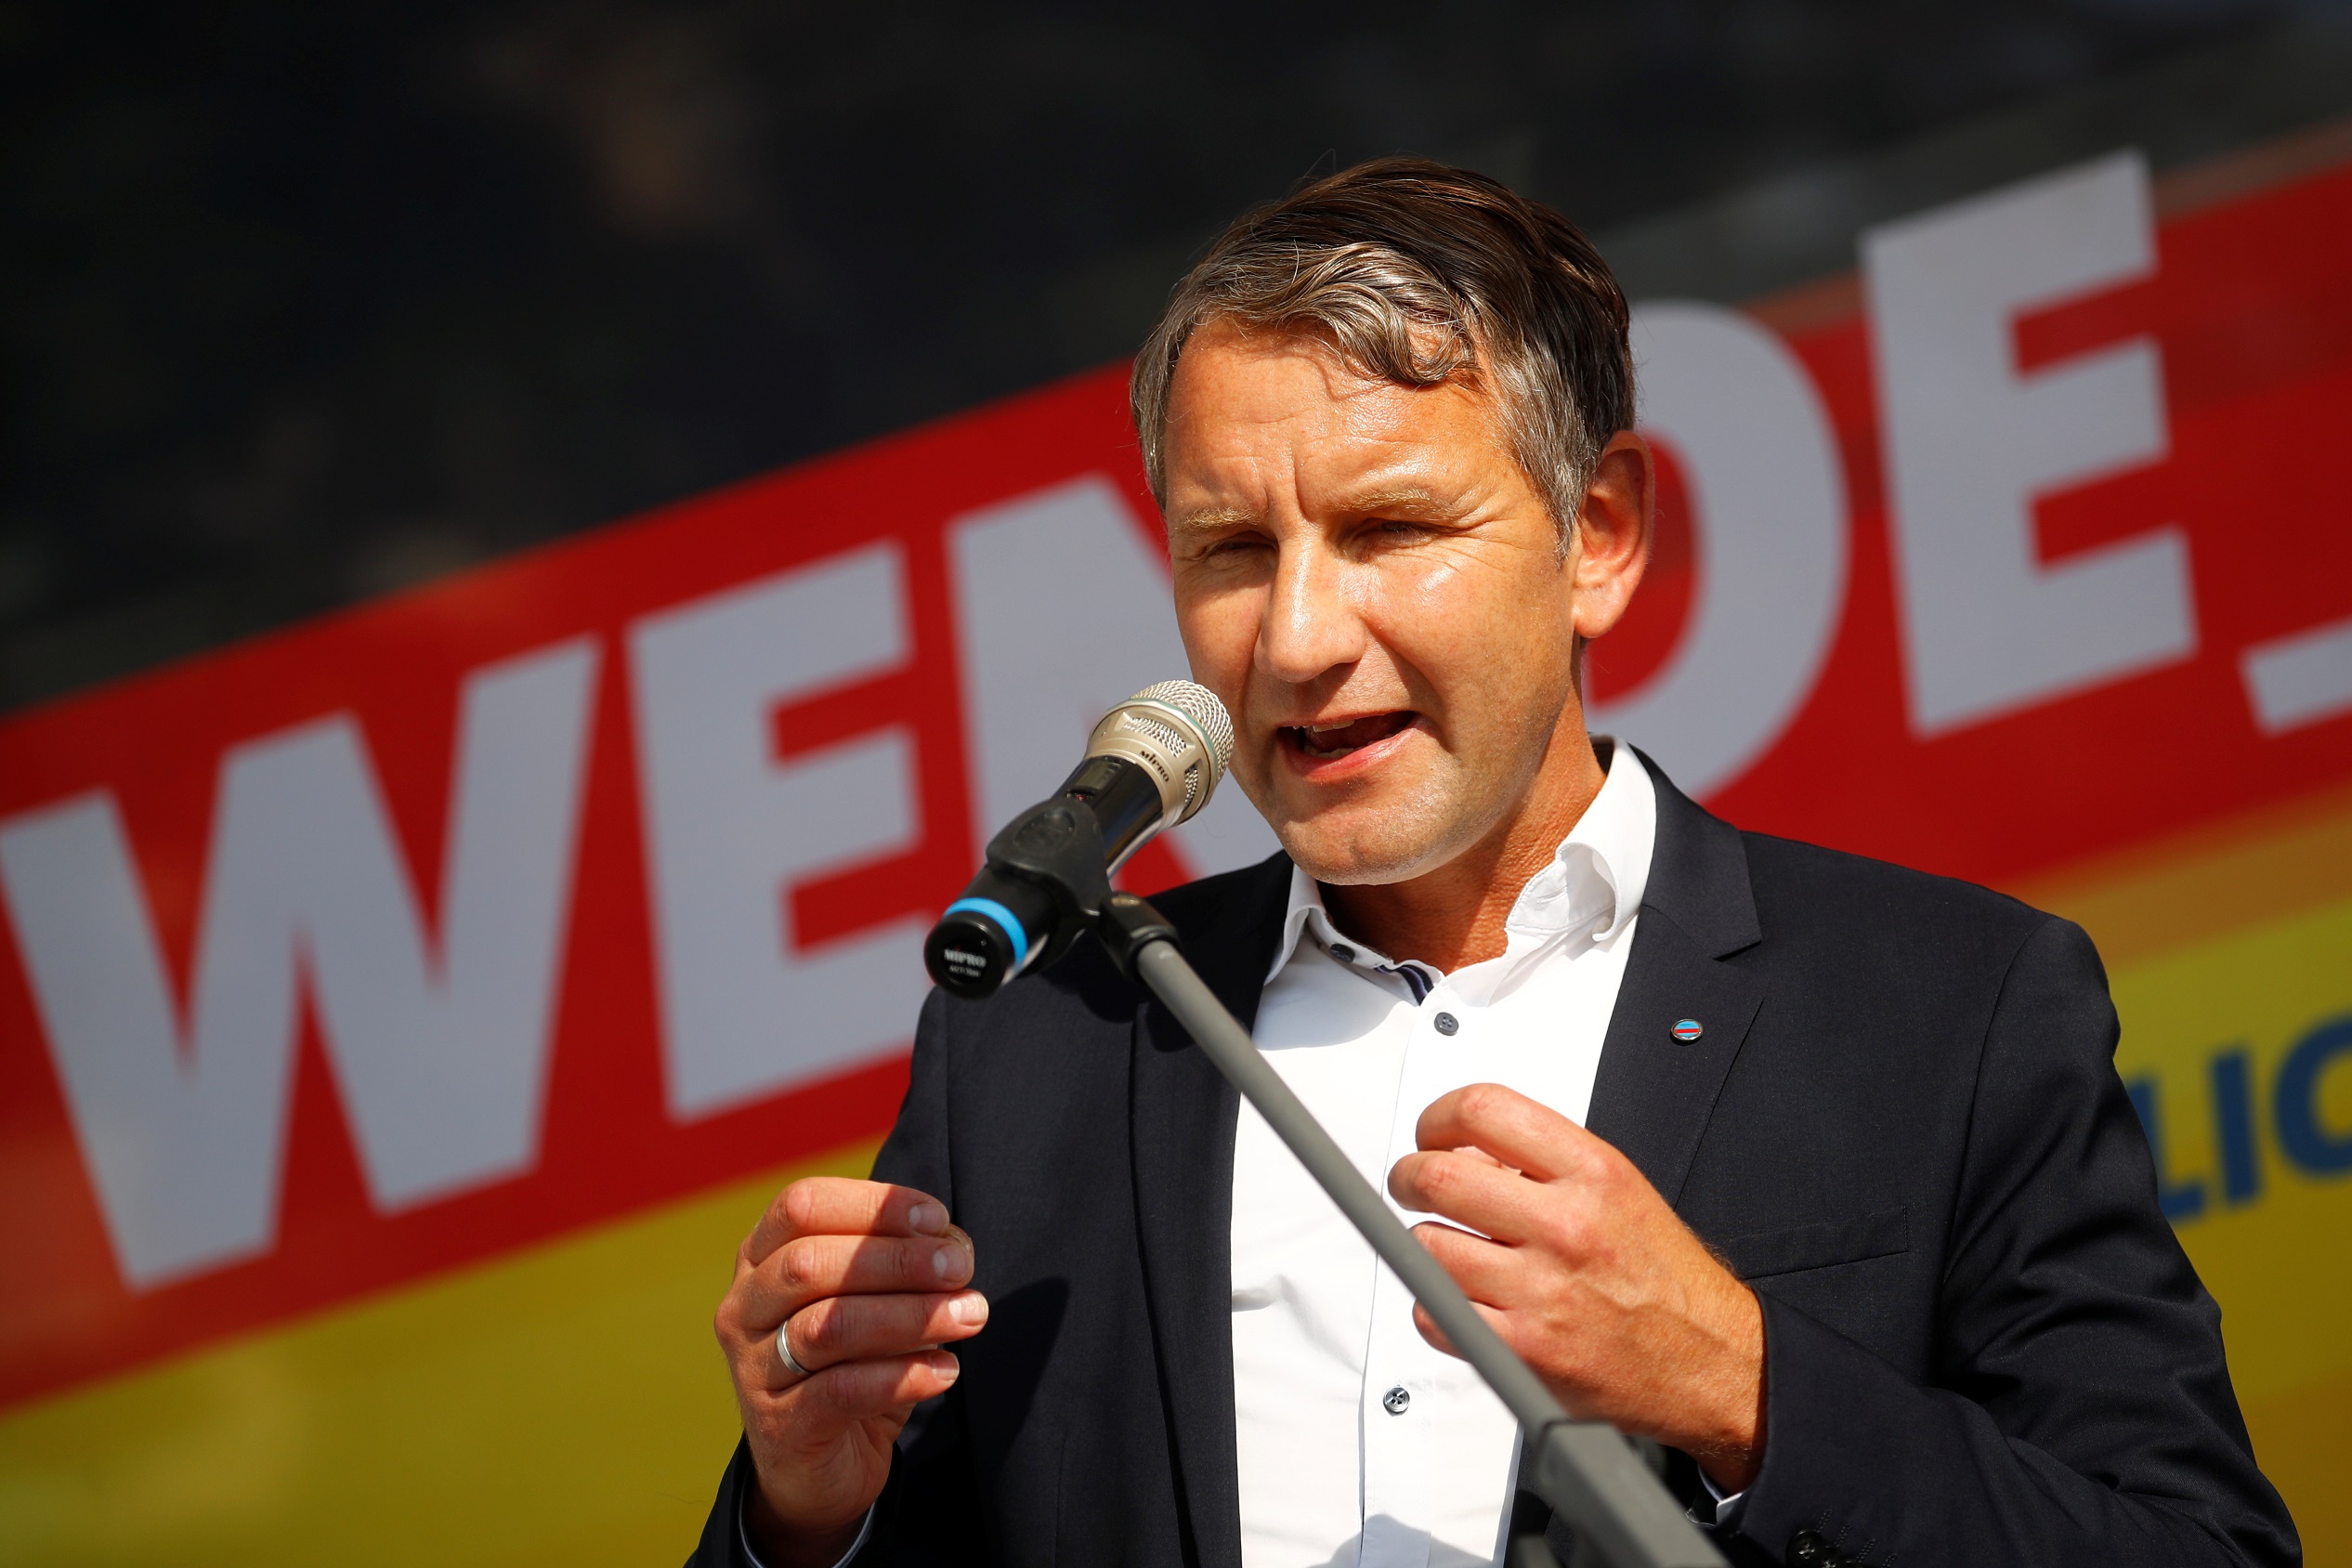 Bjoern Hoecke of Germany's far-right Alternative for Germany (AfD) party speaks during an election campaign of AfD youth organisation Young Alternative for Germany, in Cottbus, Germany, August 4, 2019. REUTERS/Hannibal Hanschke